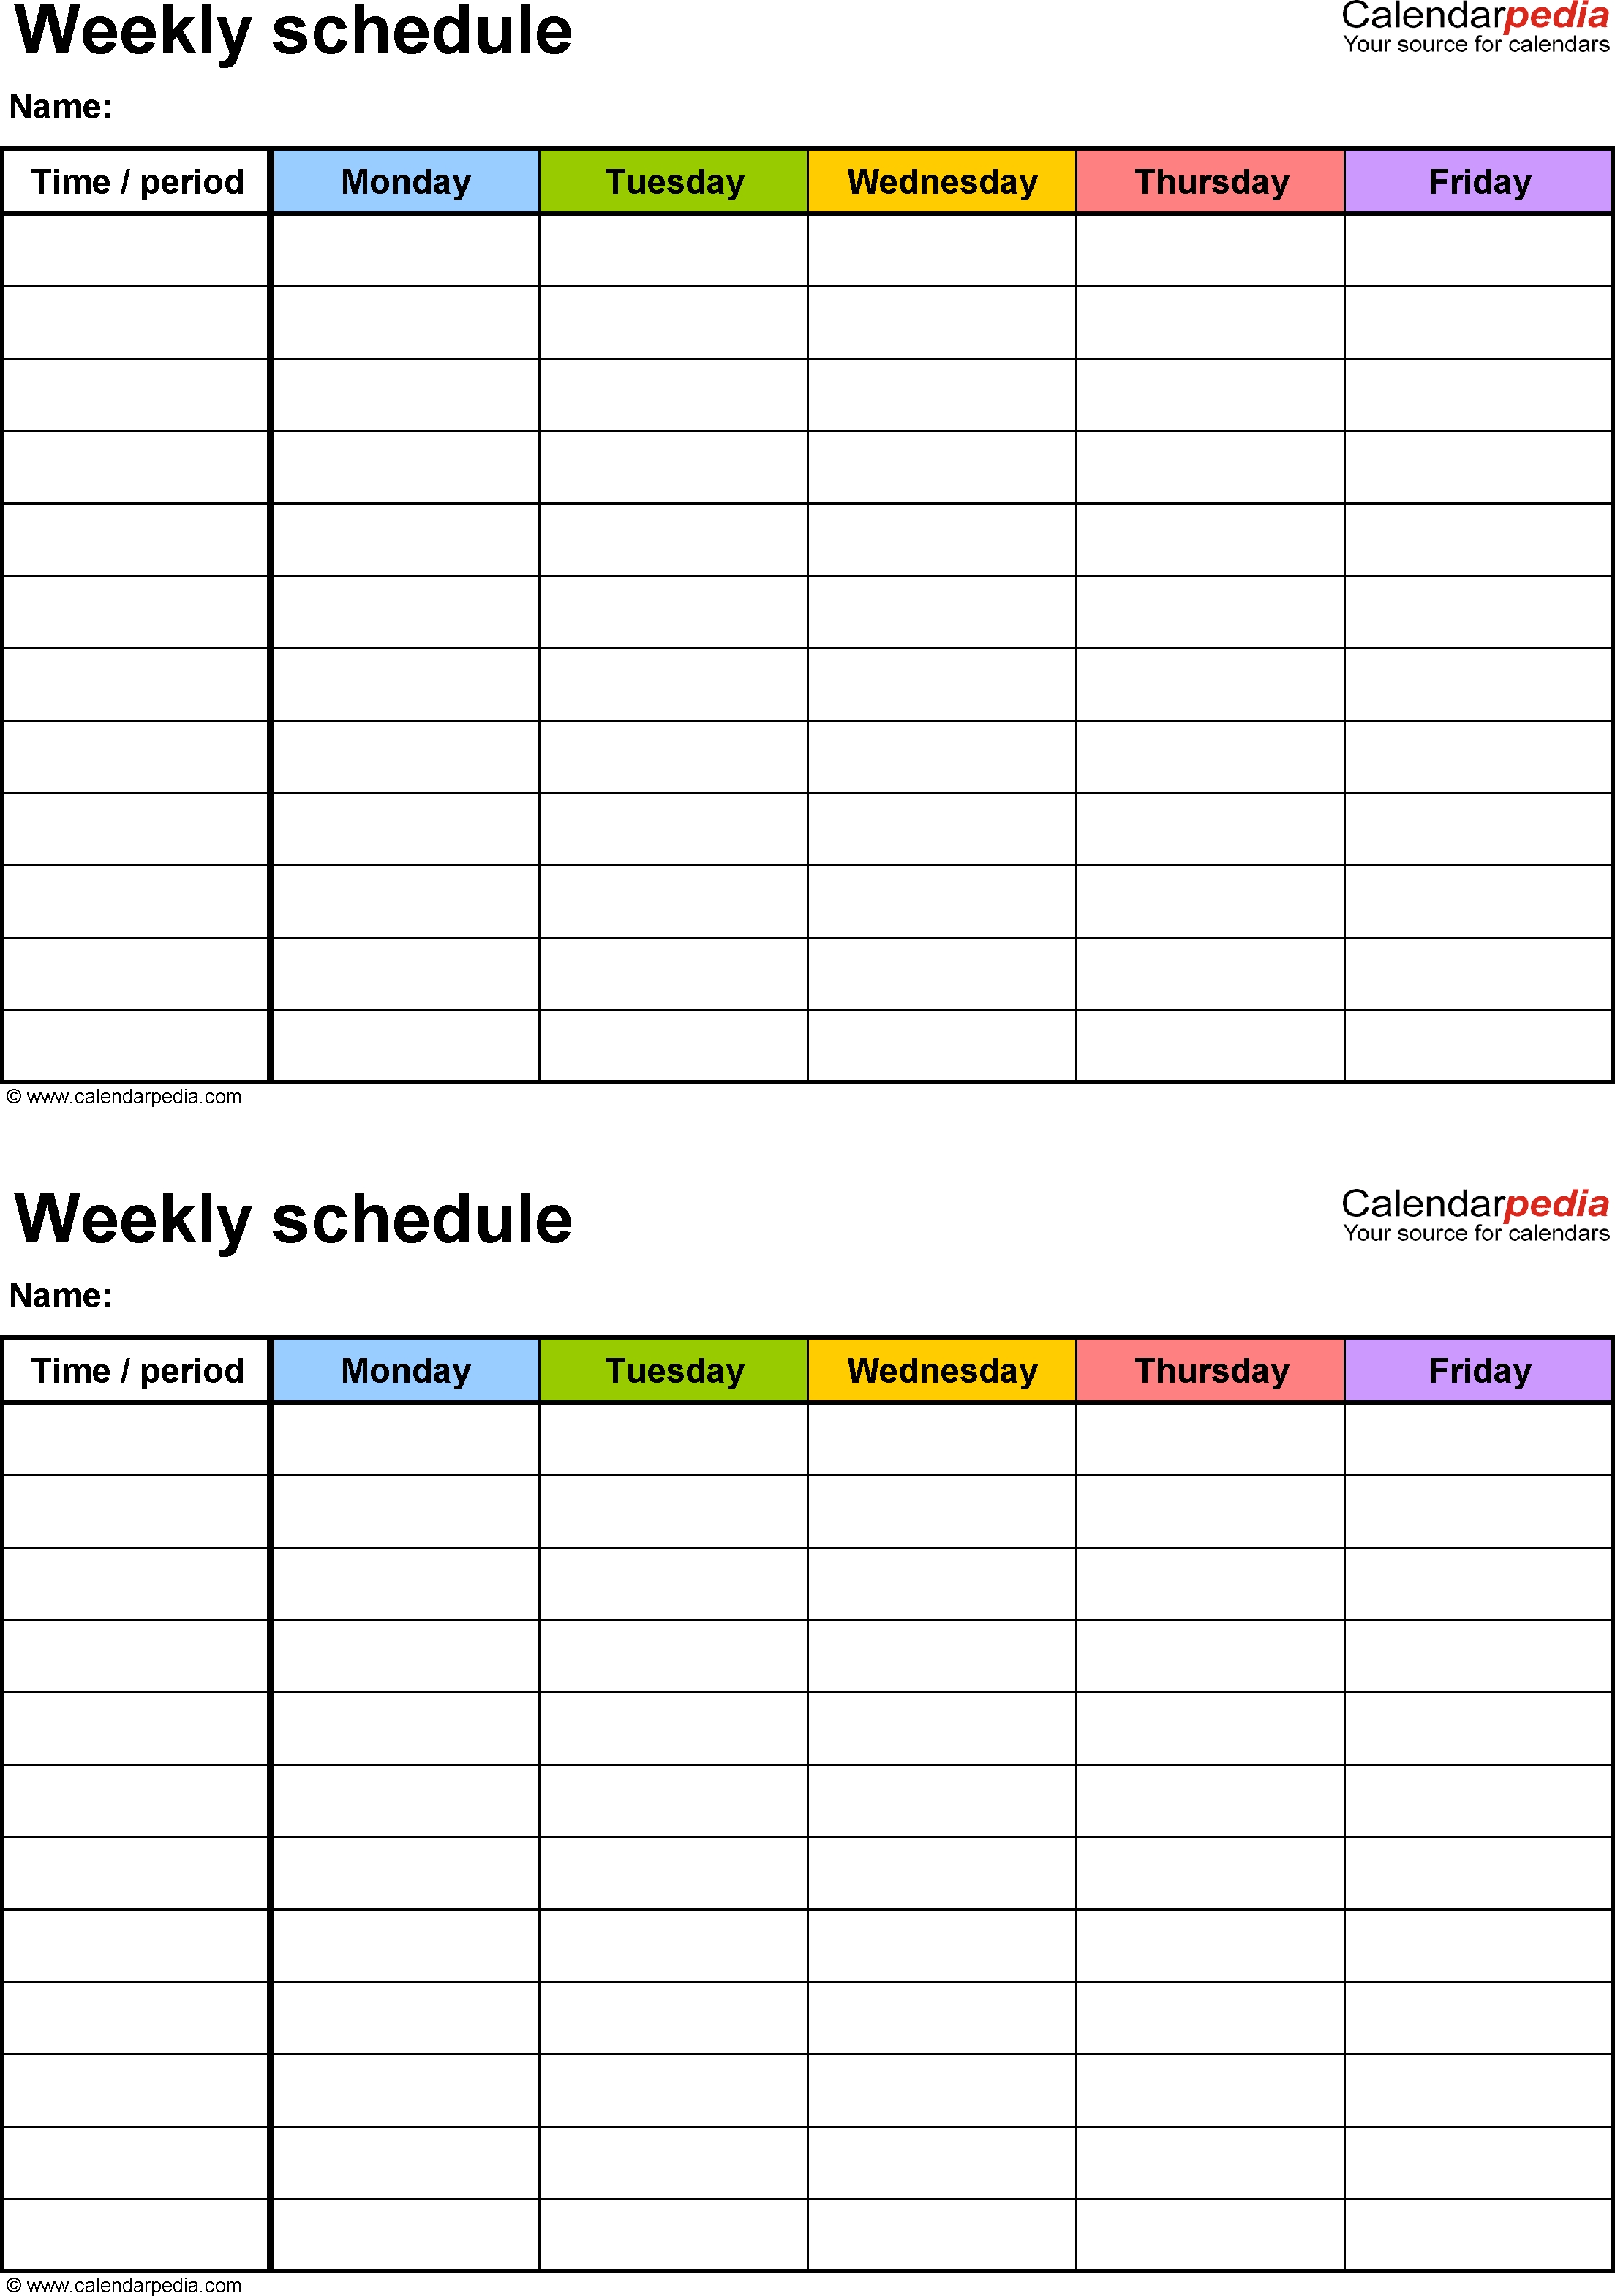 Free Weekly Schedule Templates For Pdf - 18 Templates-Calendar Template Fillable Pdf